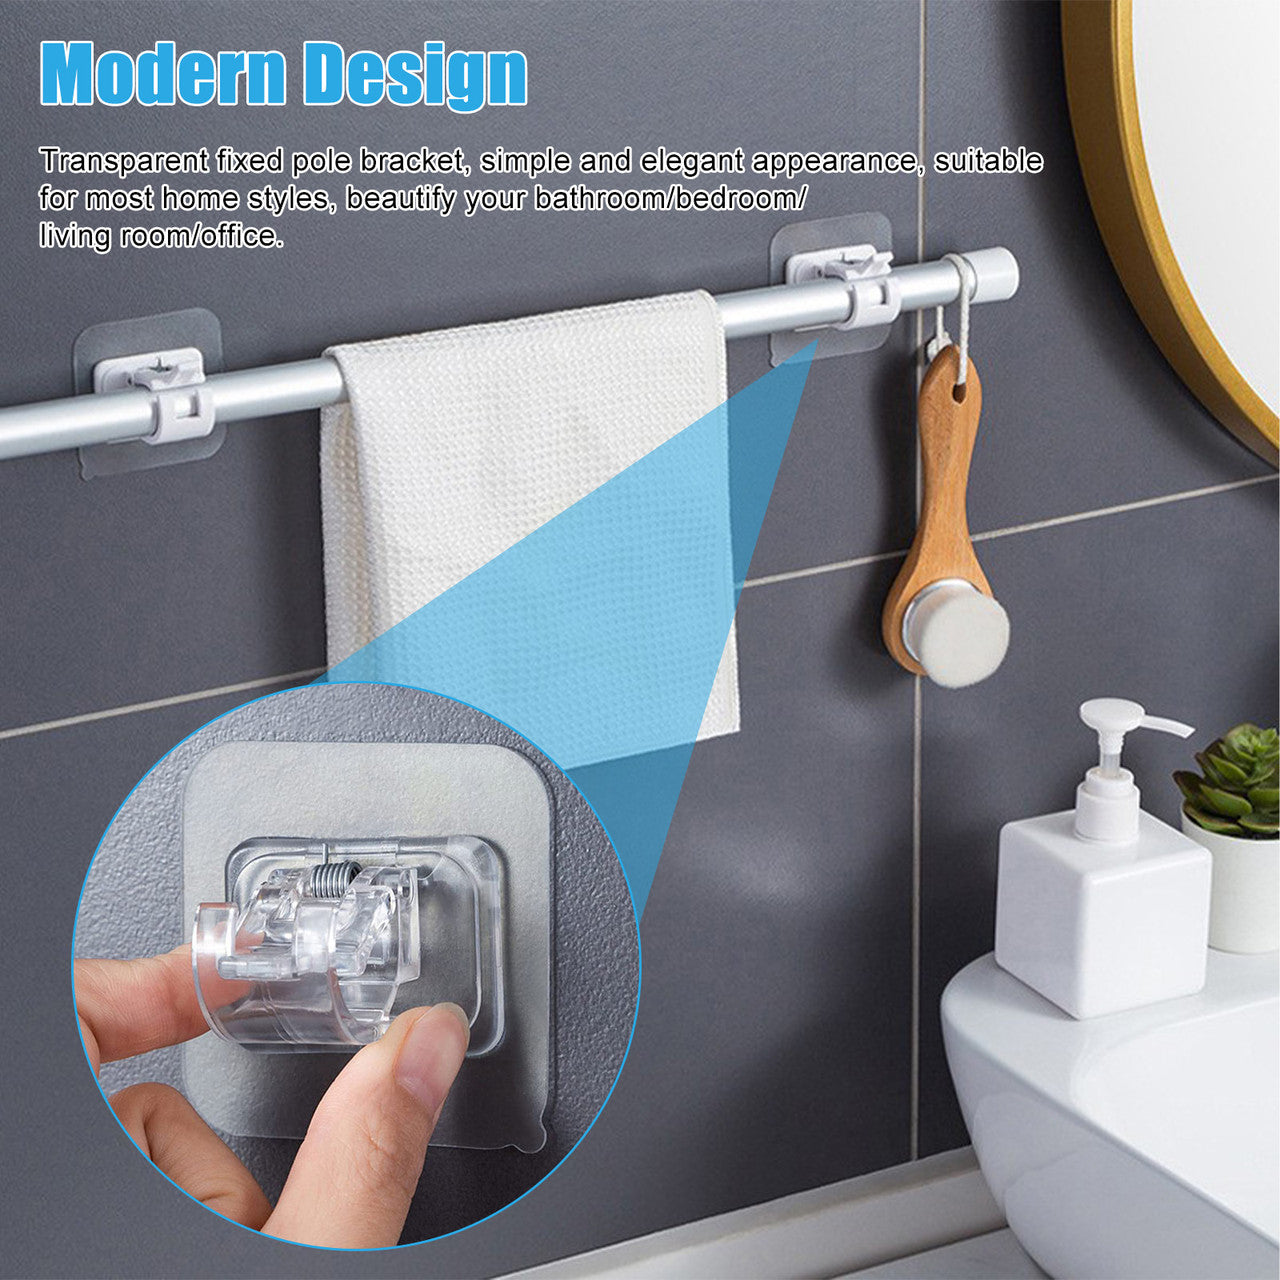 10 Packs Self Adhesive Nail Free Curtain Rod Wall Brackets Hooks - Fixings for Home Bathroom and Hotel Use (Transparent)